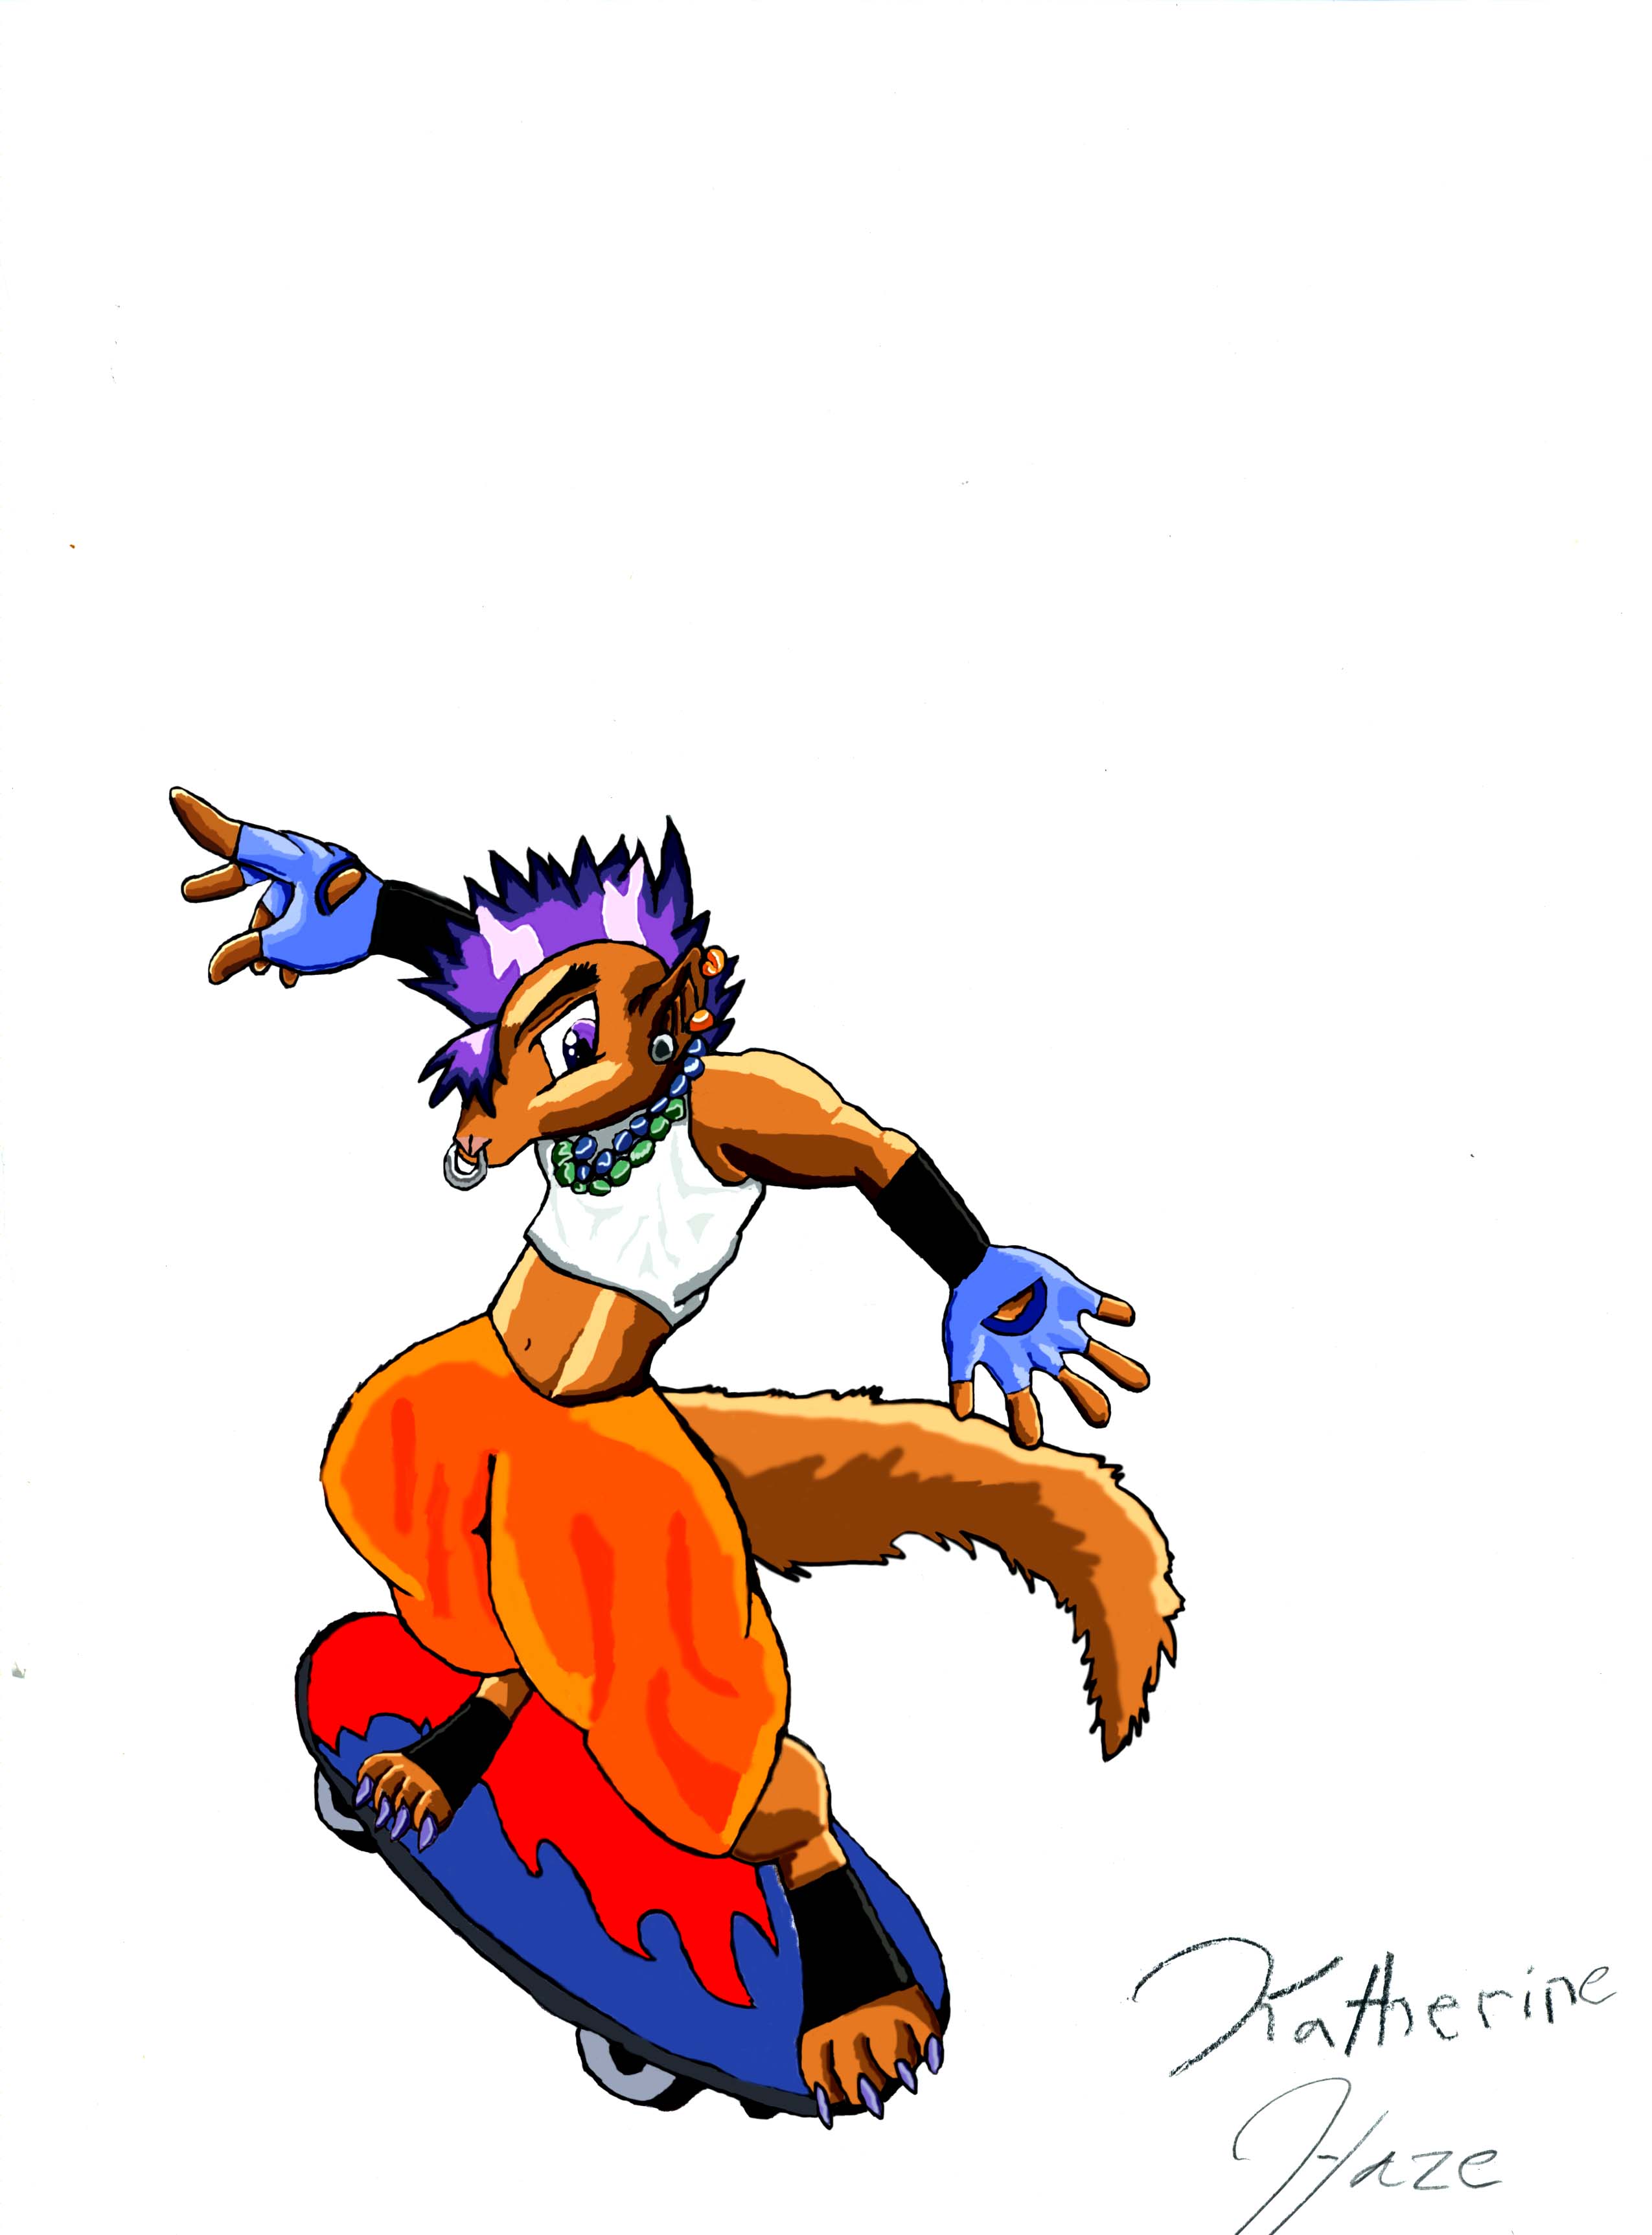 skater mongoose by crazykid15